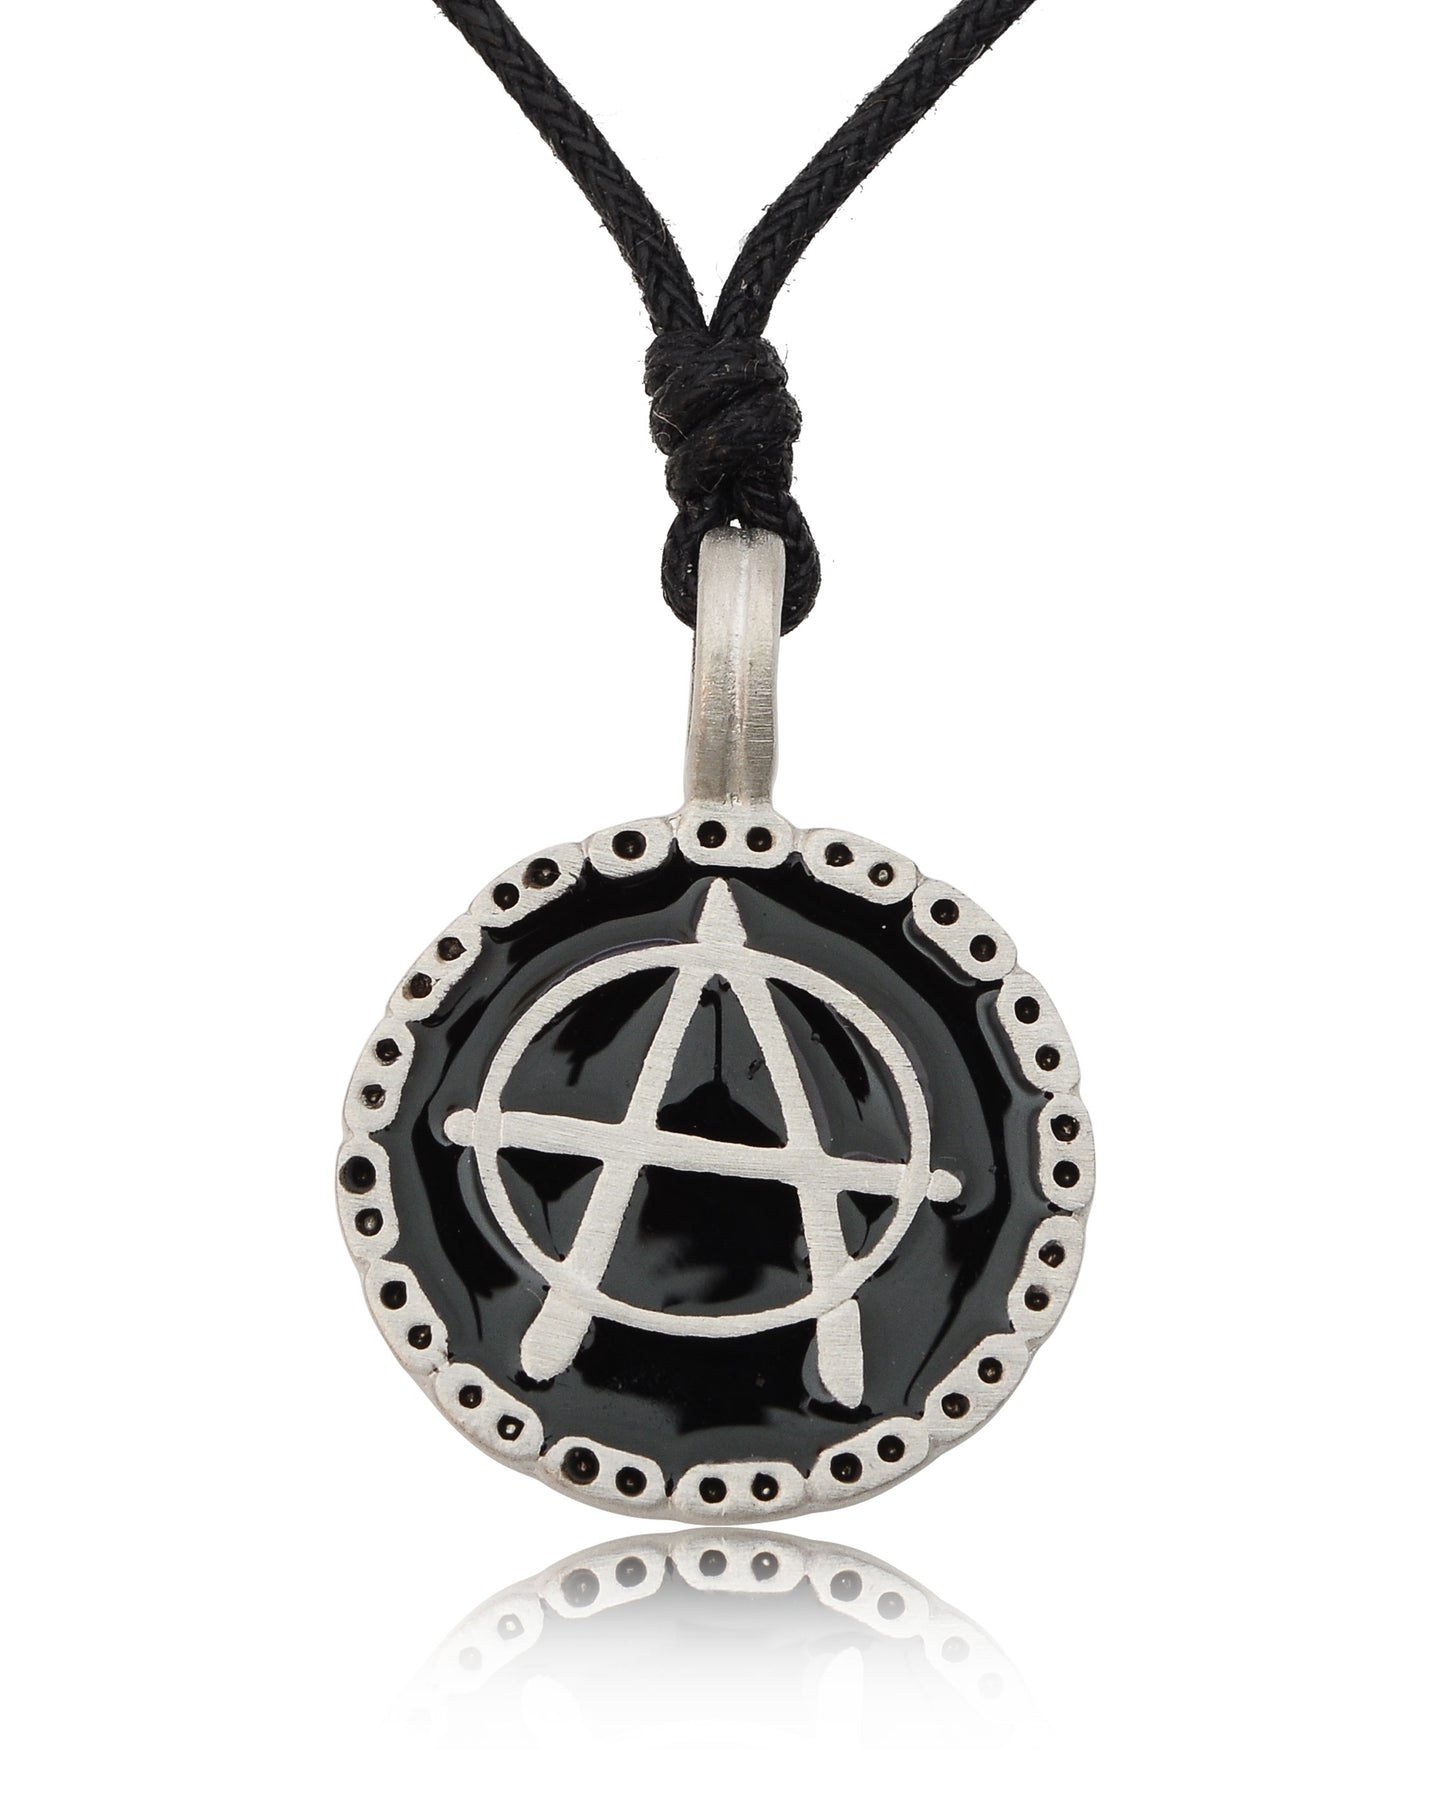 New Anarchy Letter A Silver Pewter Charm Necklace Pendant Jewelry